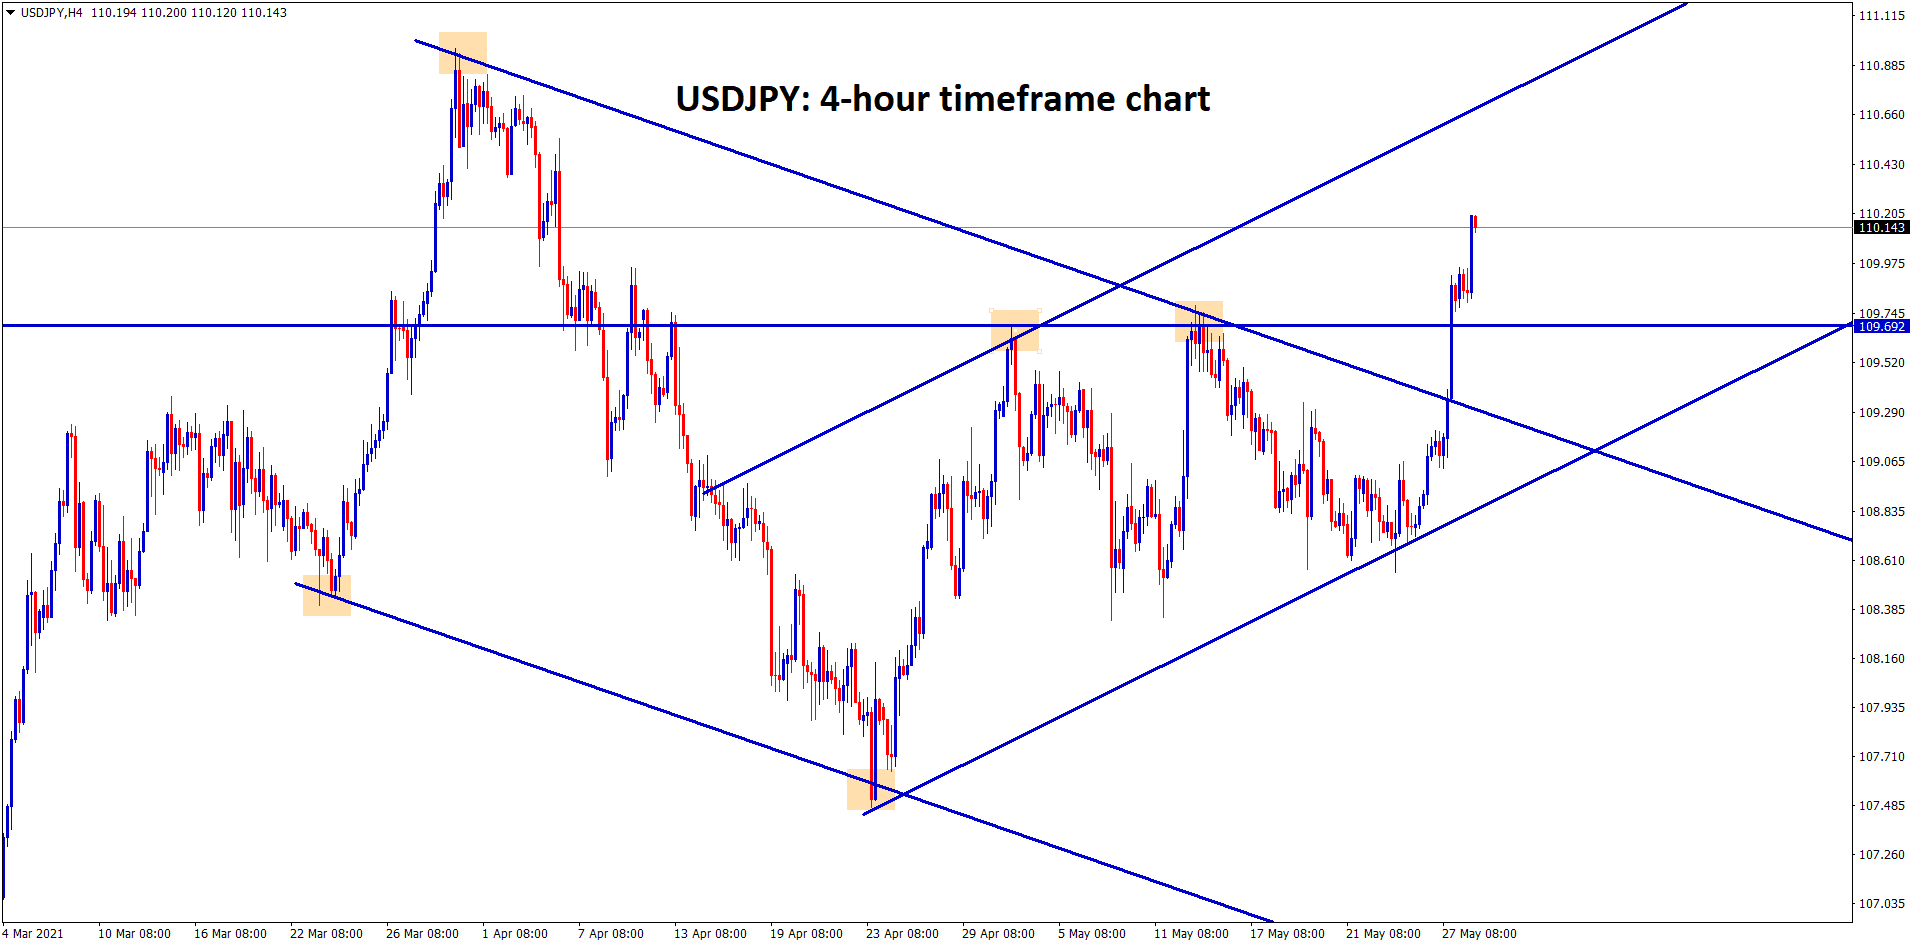 USDJPY is moving in an uptrend breaking the ascending triangle top